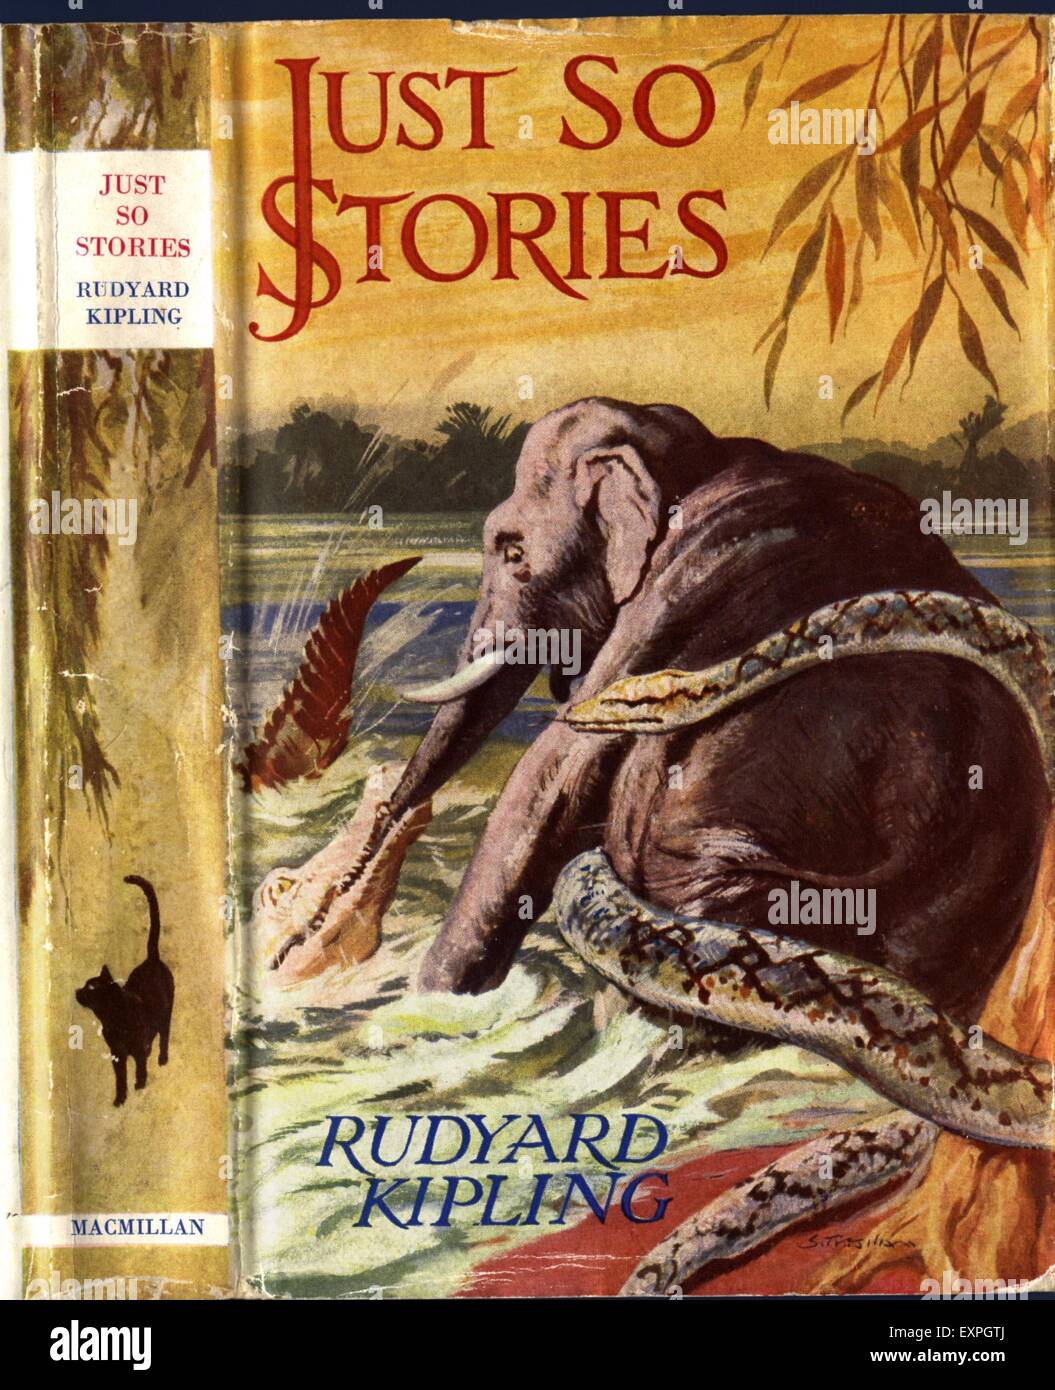 Rudyard Kipling Book High Resolution Stock Photography and Images - Alamy